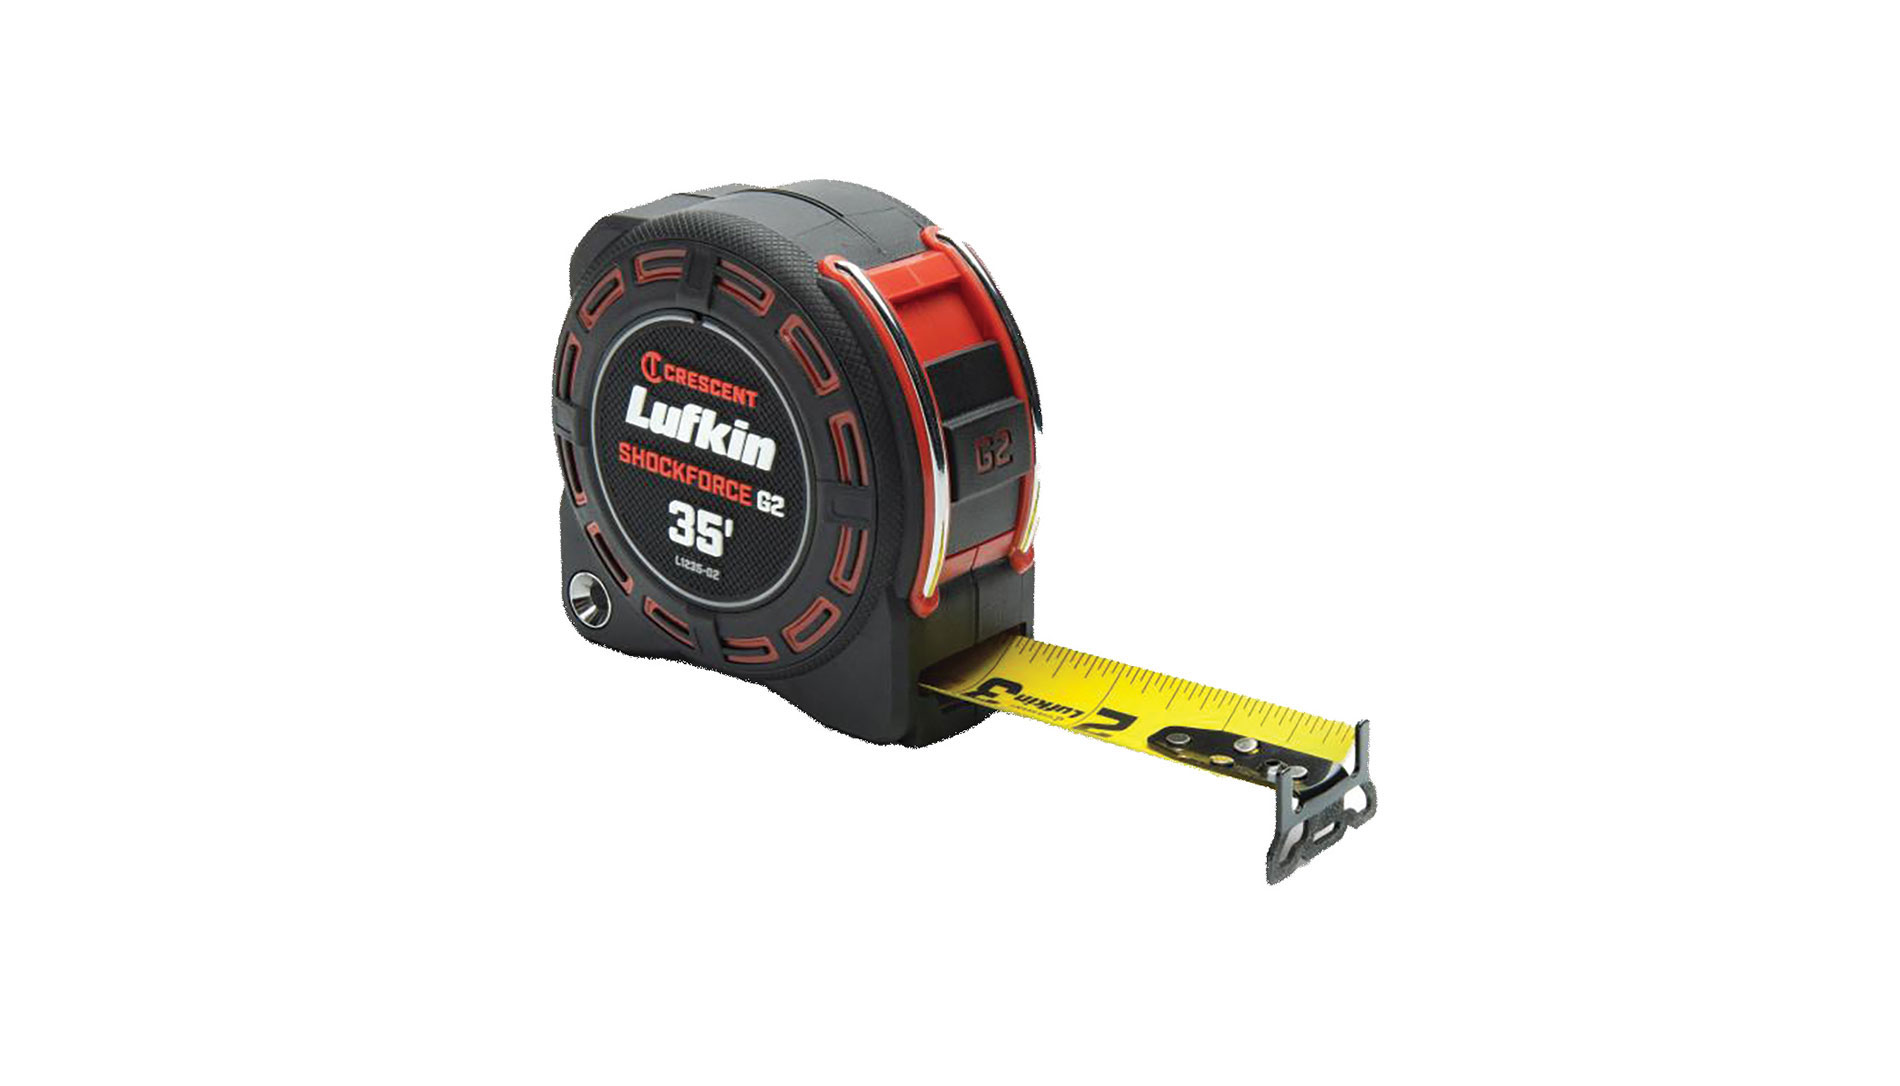 Tape measure with a black and red case reading Lufkin 35 feet. Image by Crescent Tools.